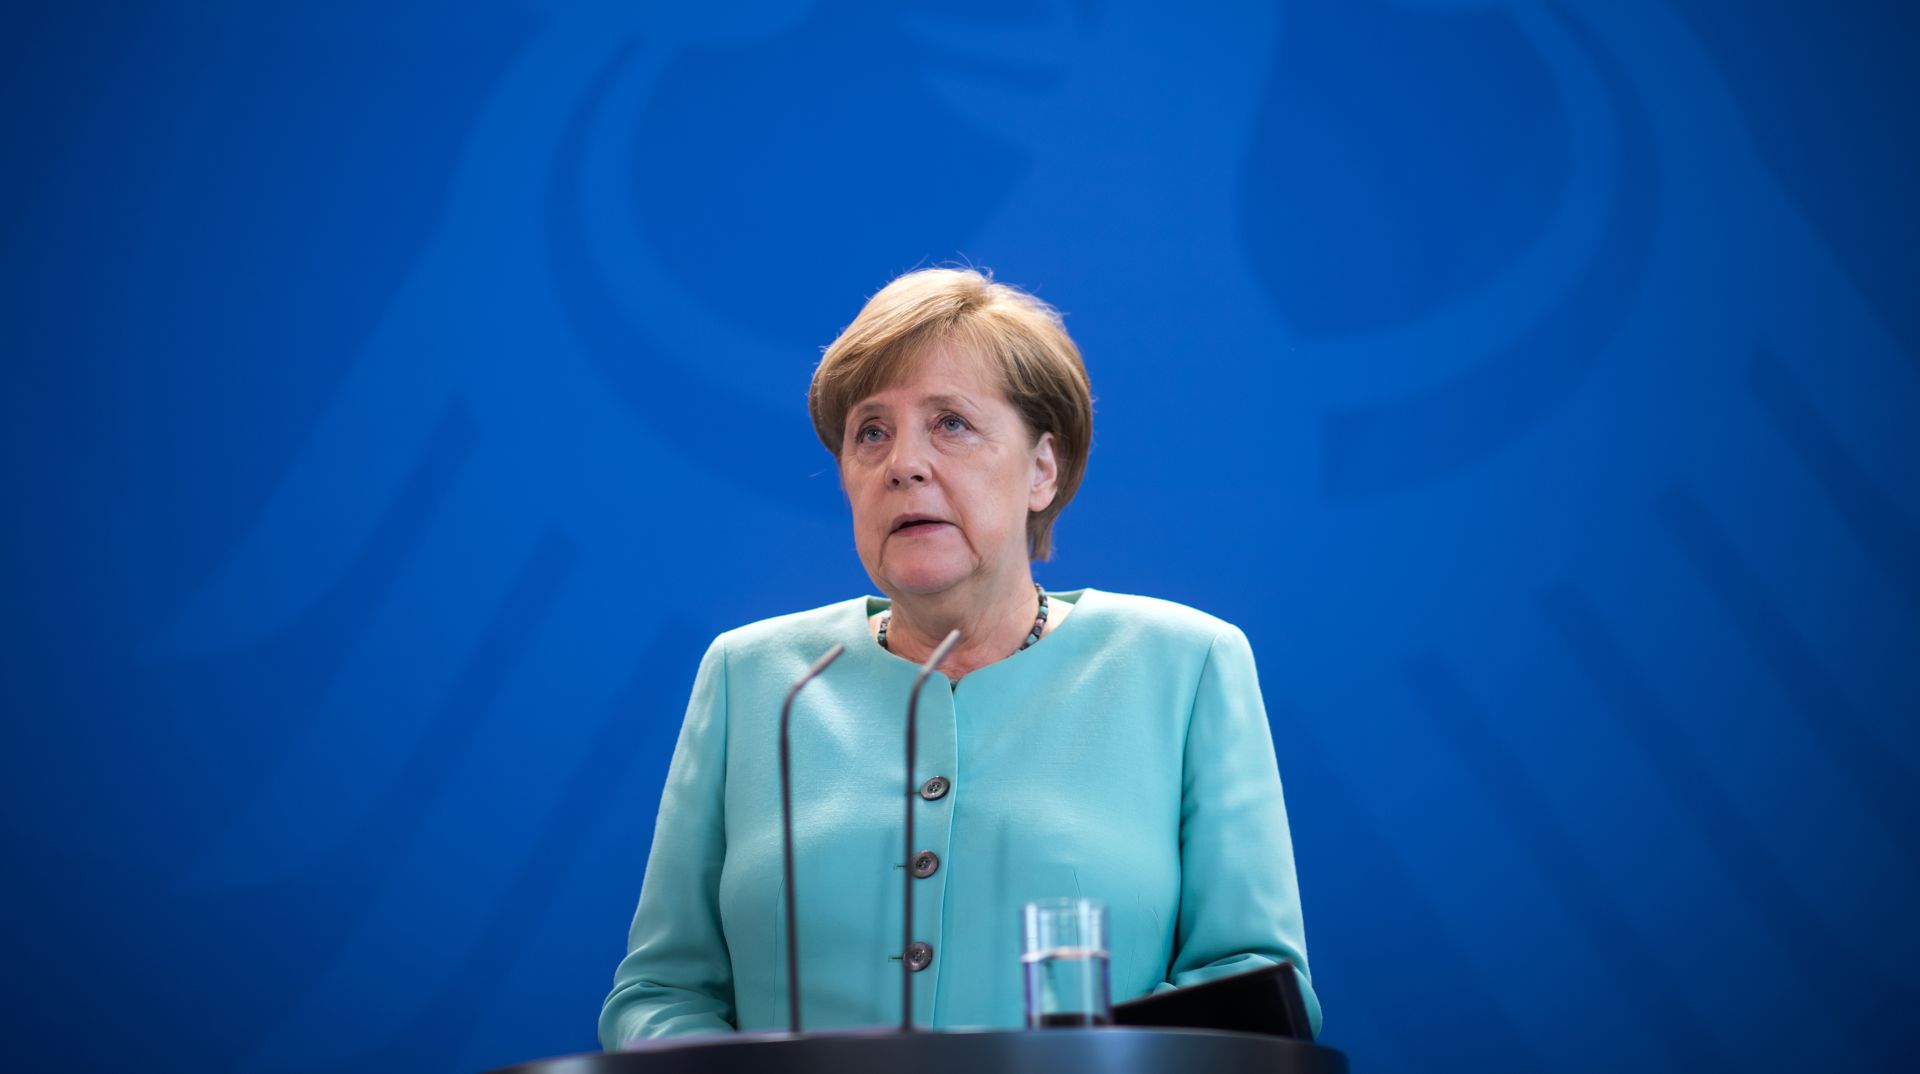 German Chancellor Angela Merkel (CDU) comments on the termination of the Paris climate accord by the United States of America at the Chancellor's Office in Berlin, Germany, 02 June 2017. Photo: Bernd von Jutrczenka/dpa